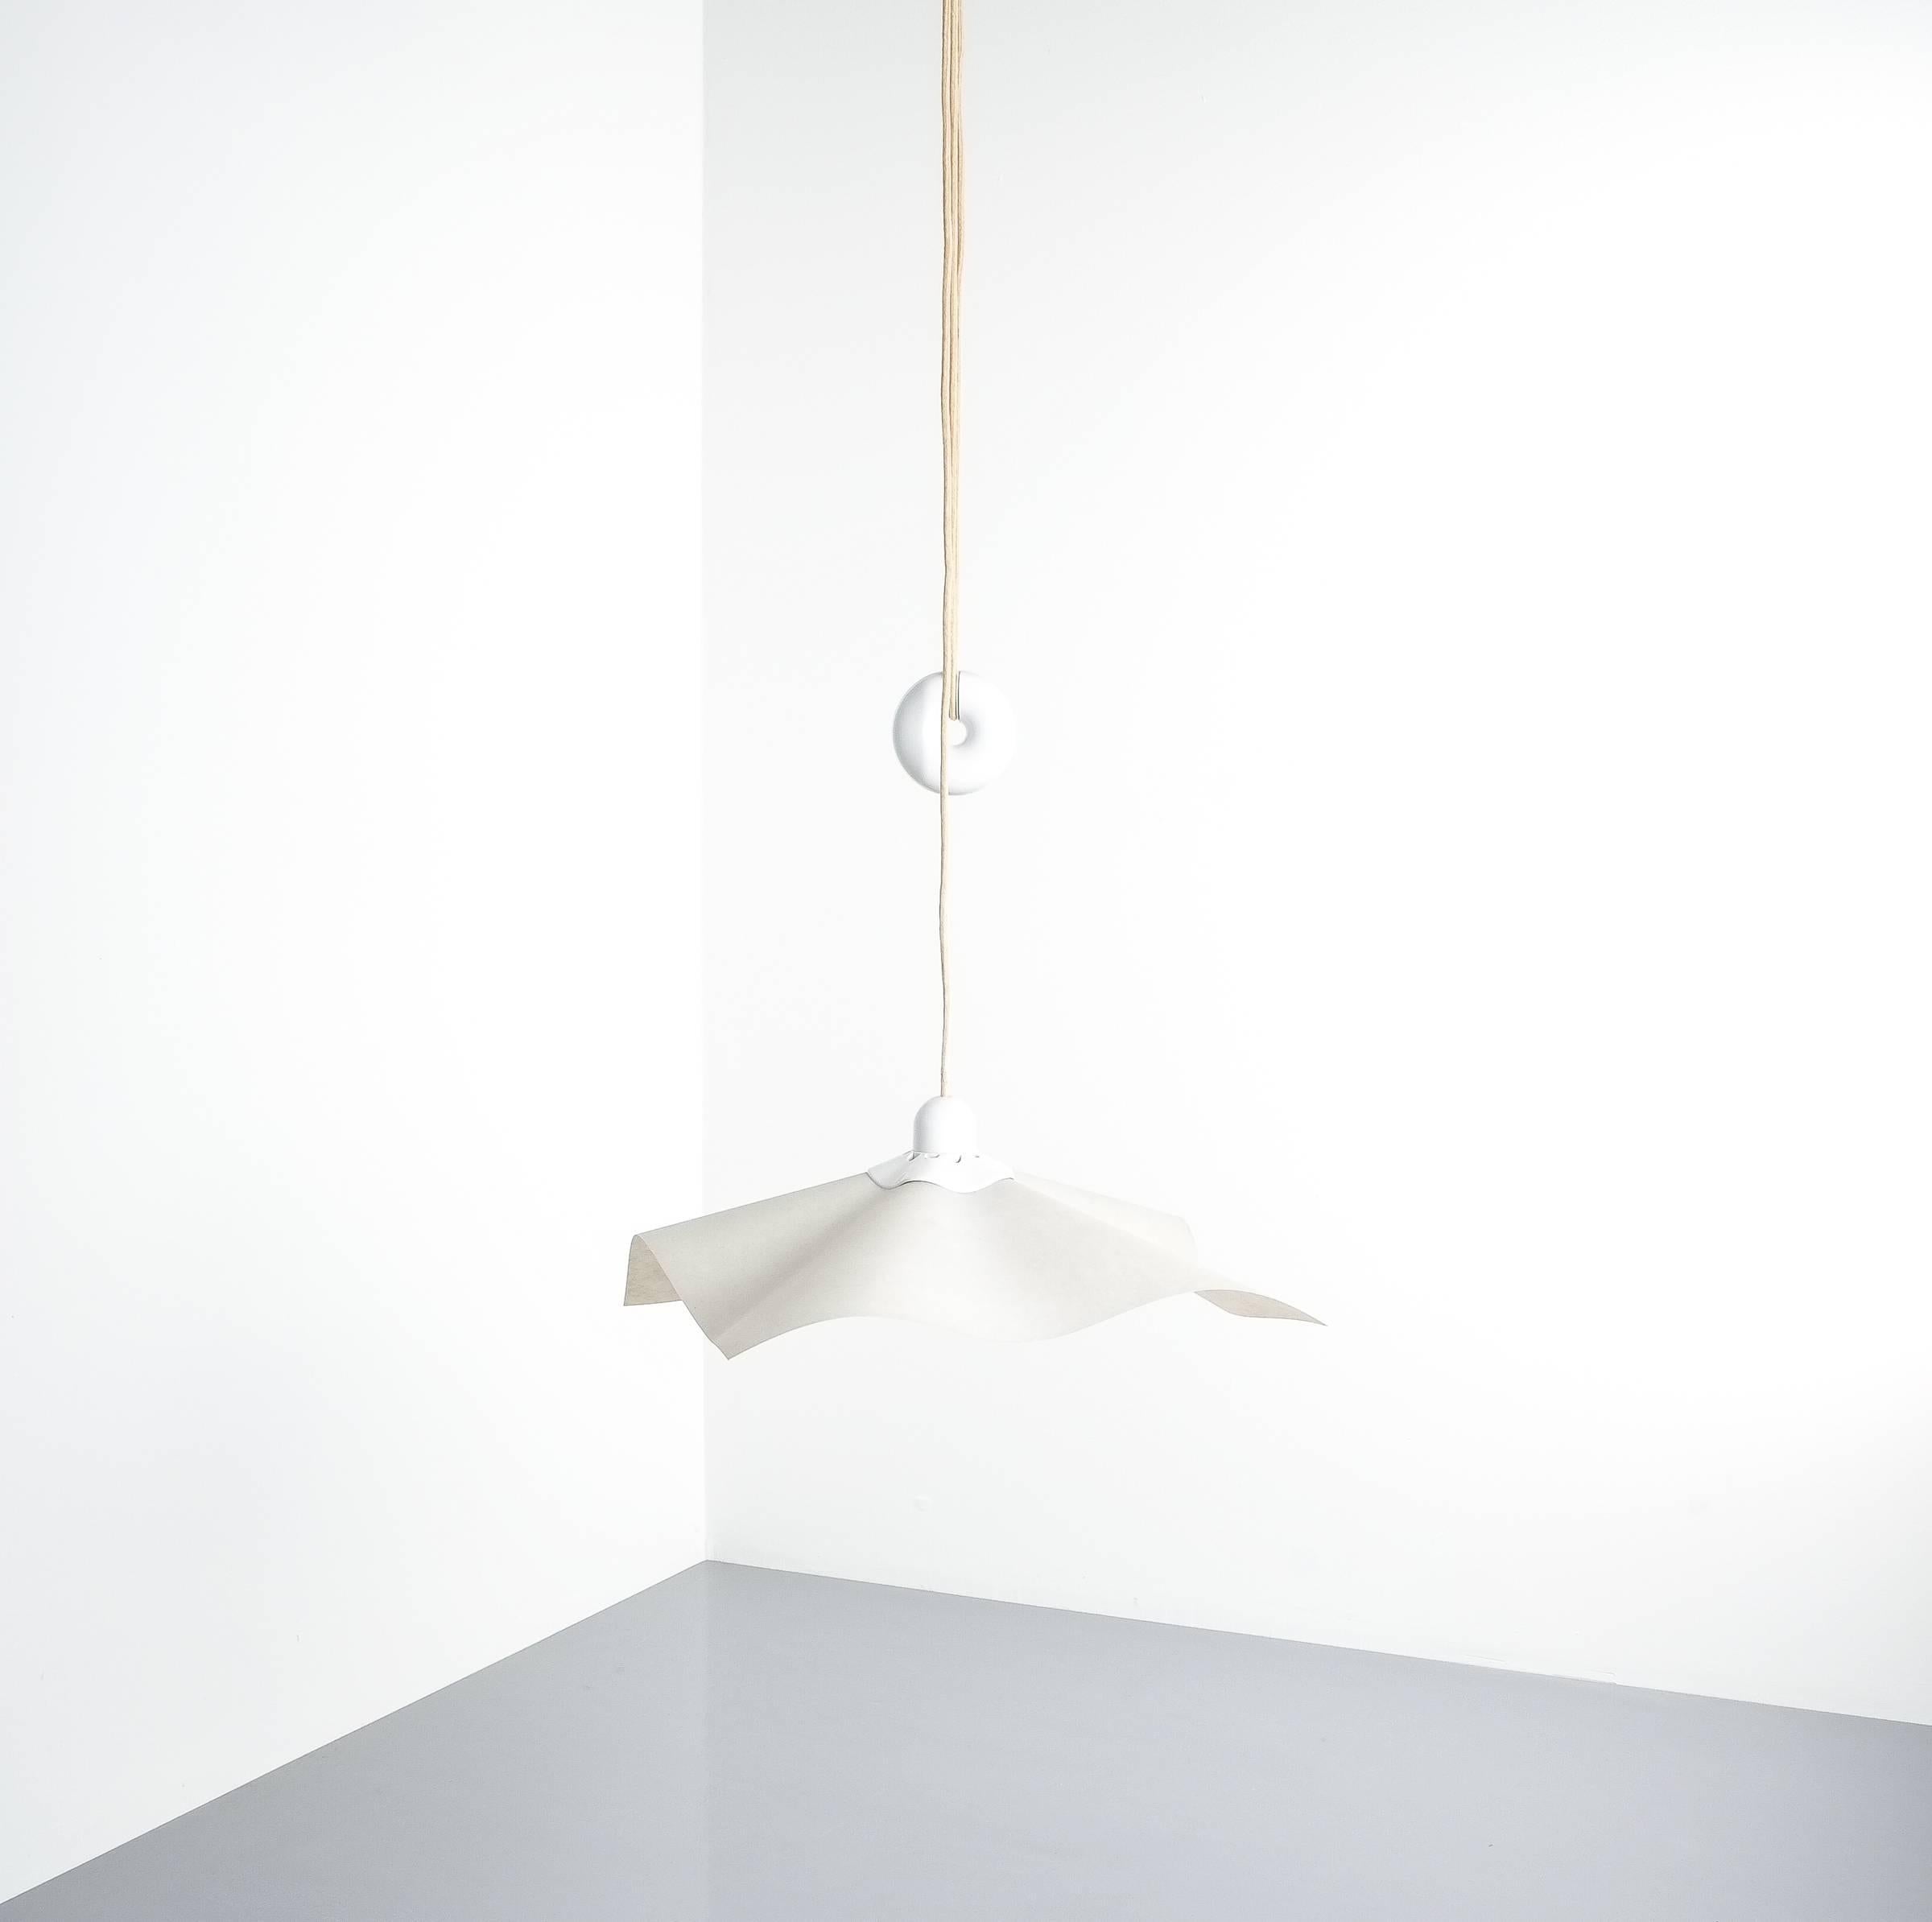 Rare Mario Bellini area counterweight pendant lamp by Artemide, Italy, 1976. Very intelligently designed counterbalance lamp in very good condition. Height can be adjusted, ranging from 43.3